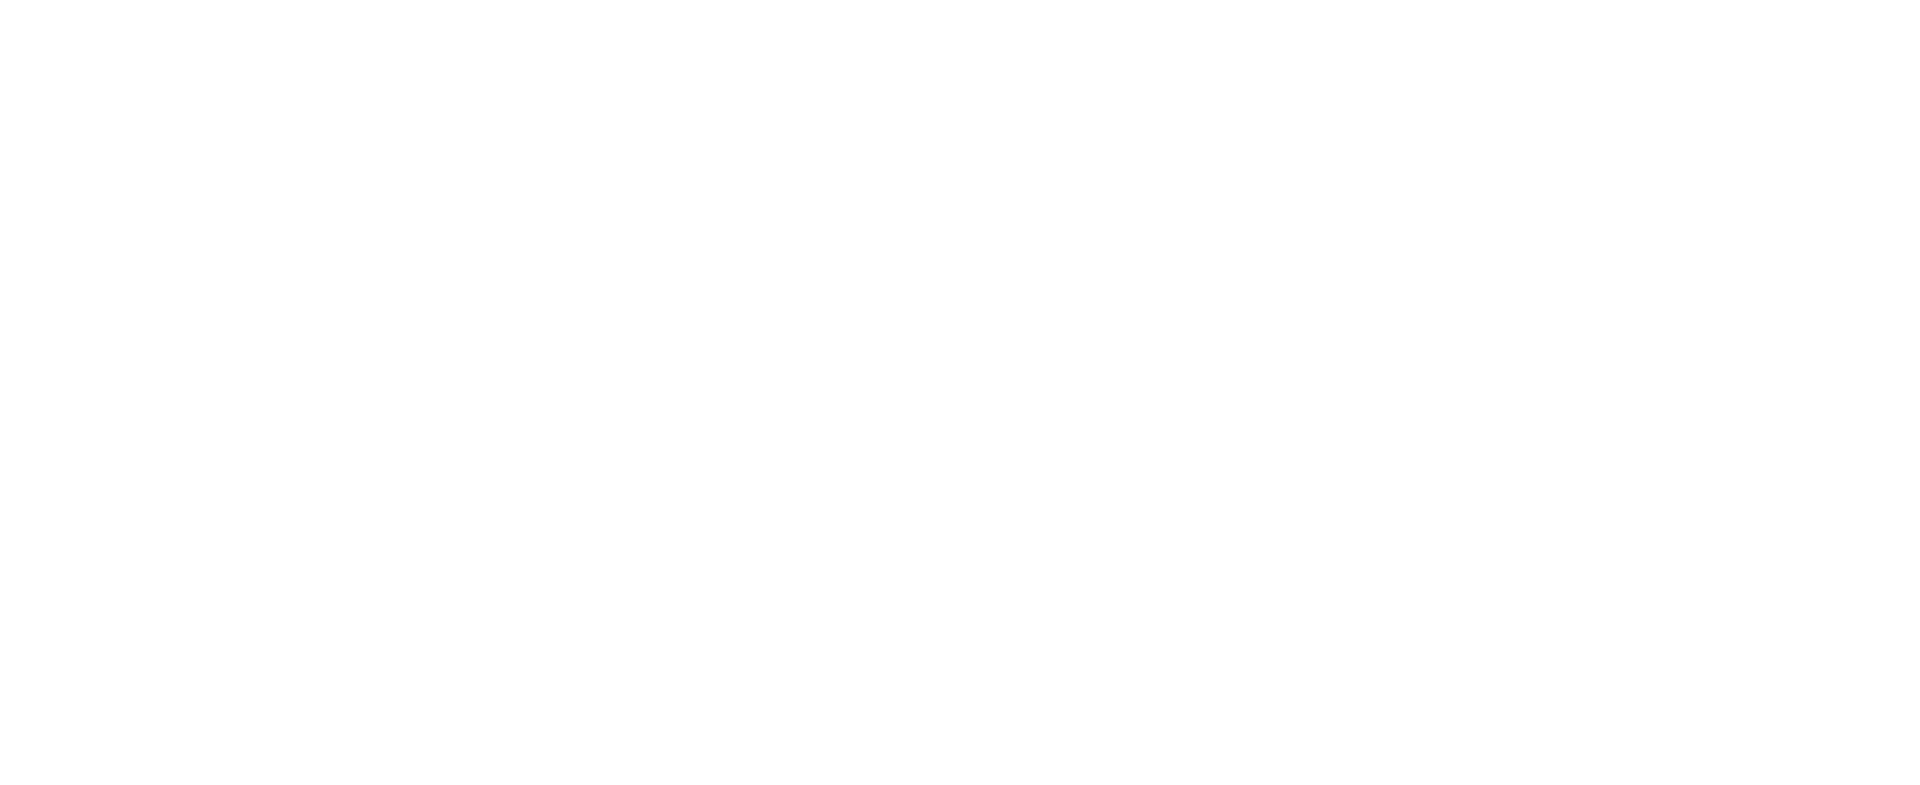 Brand solutions